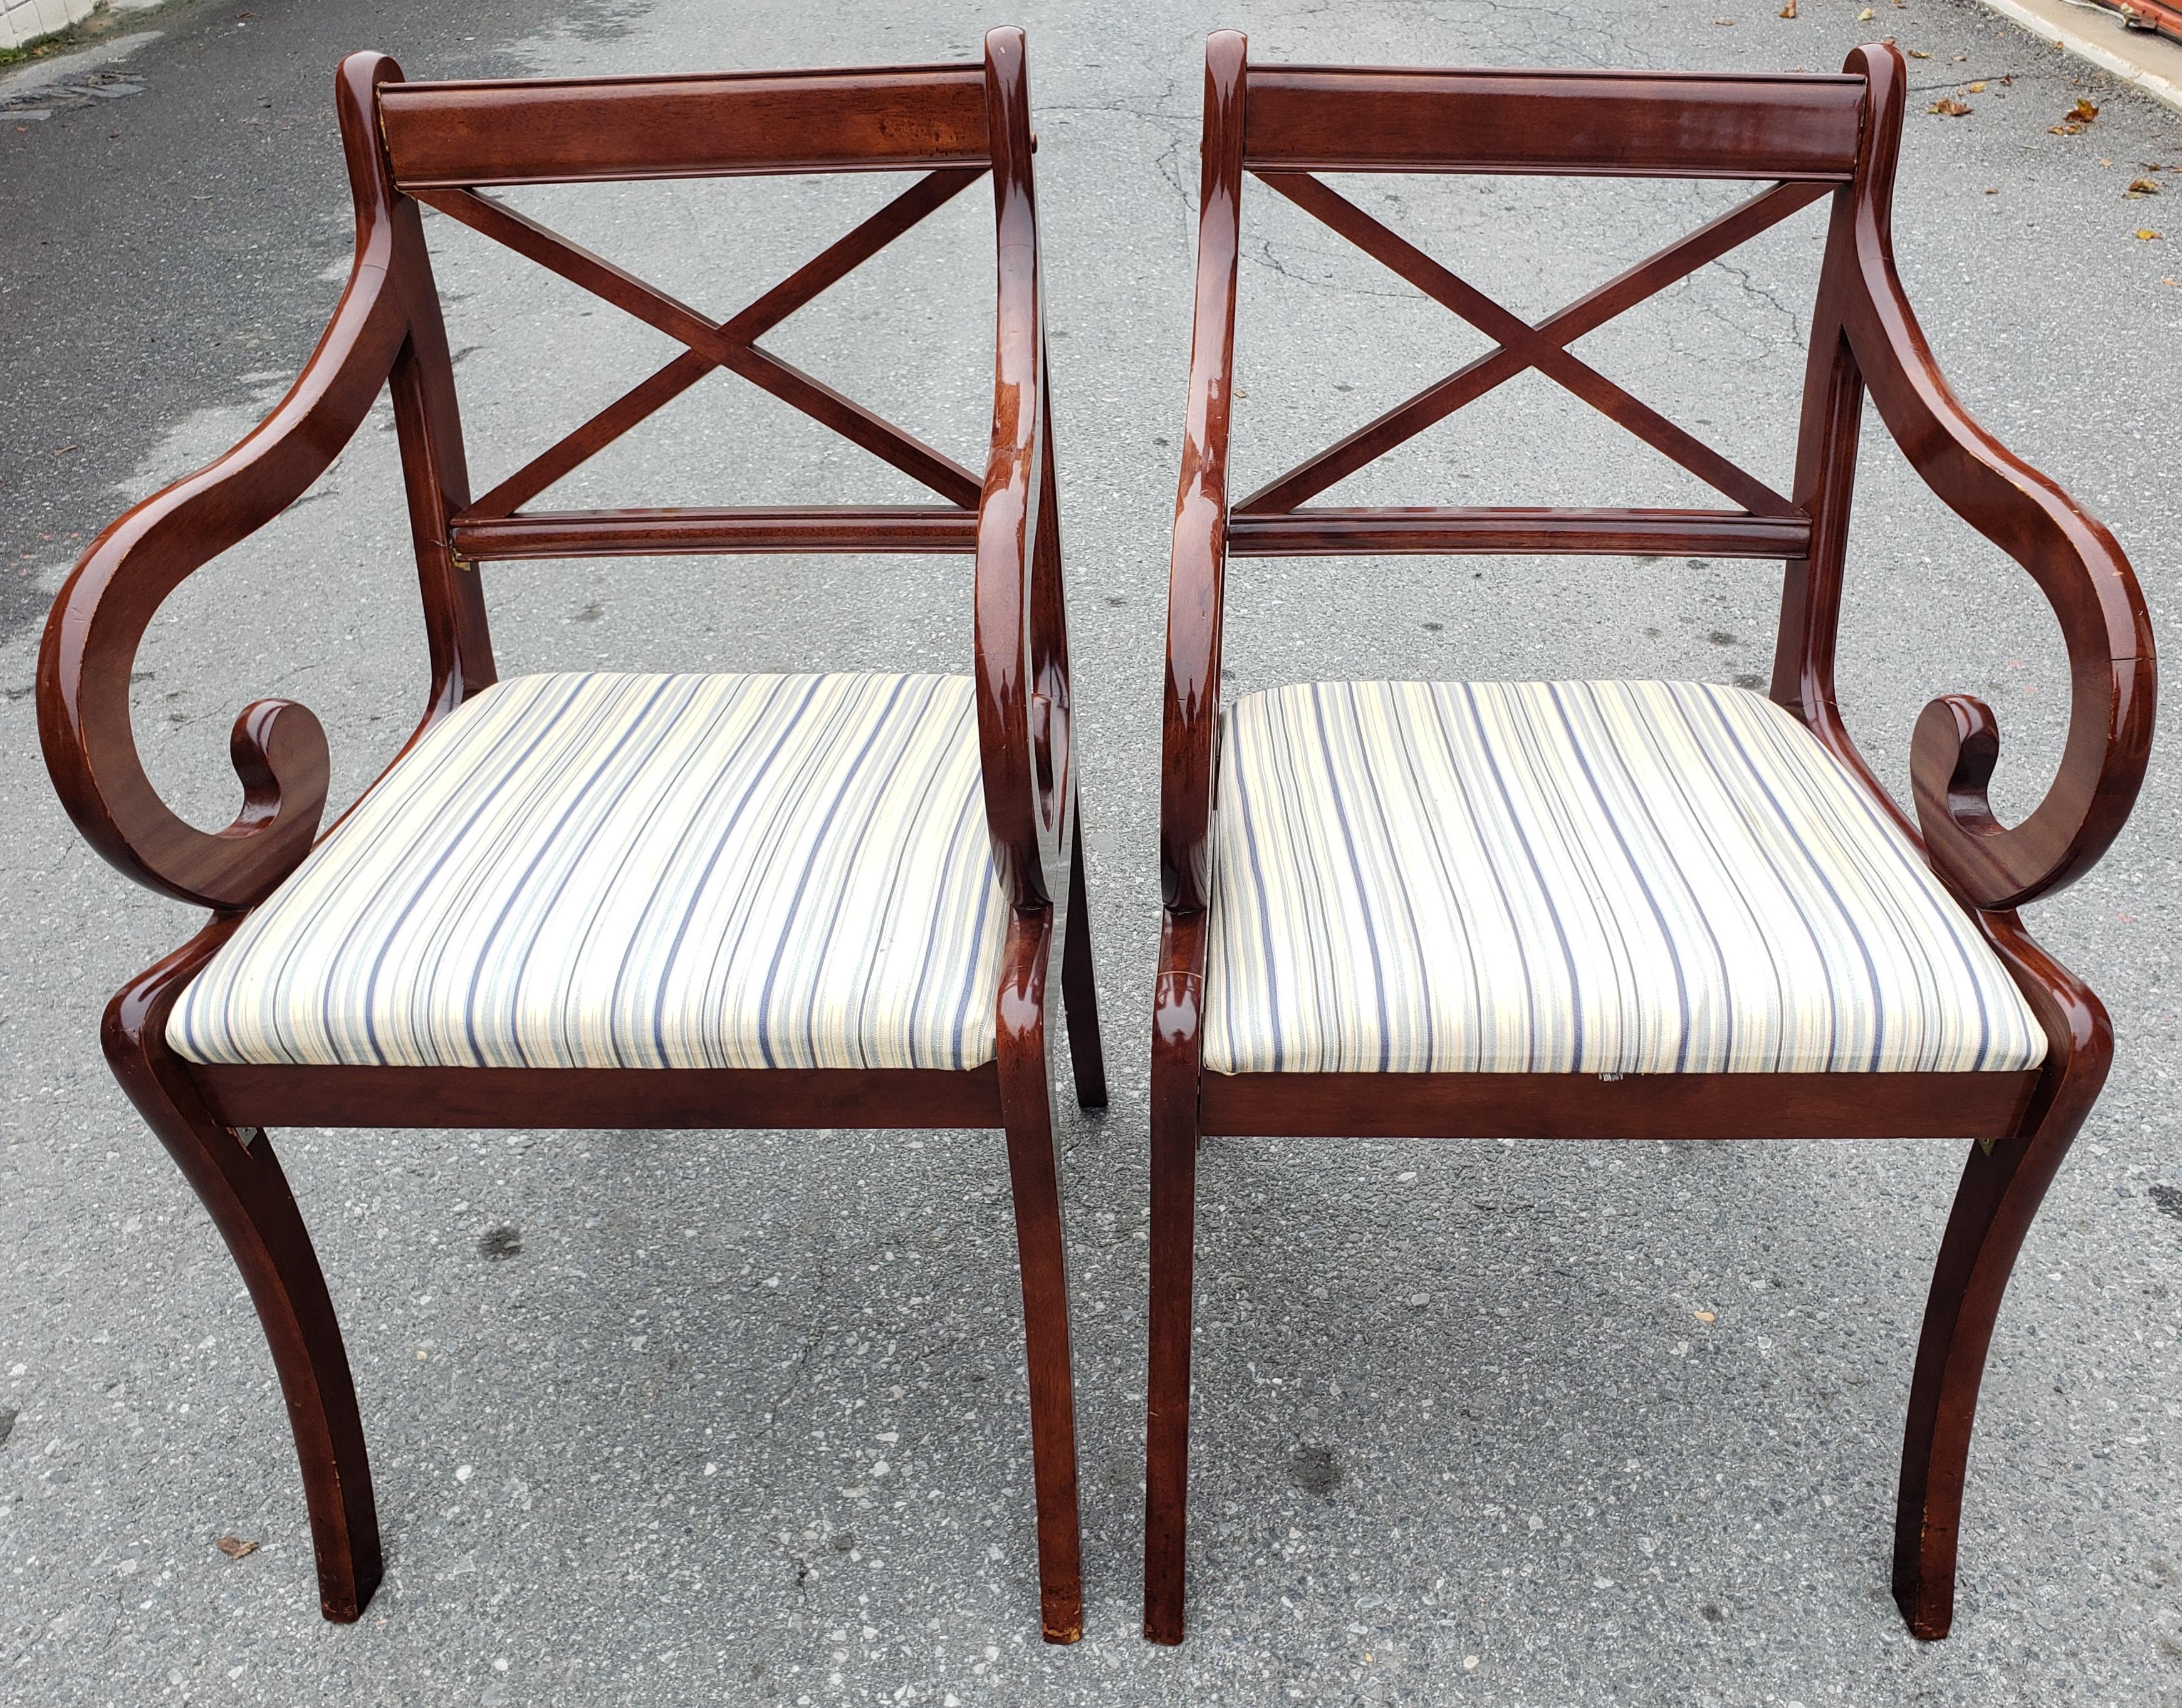 1980s Vintage Regency Mahogany Upholstered Arm Chairs, a Pair In Good Condition For Sale In Germantown, MD